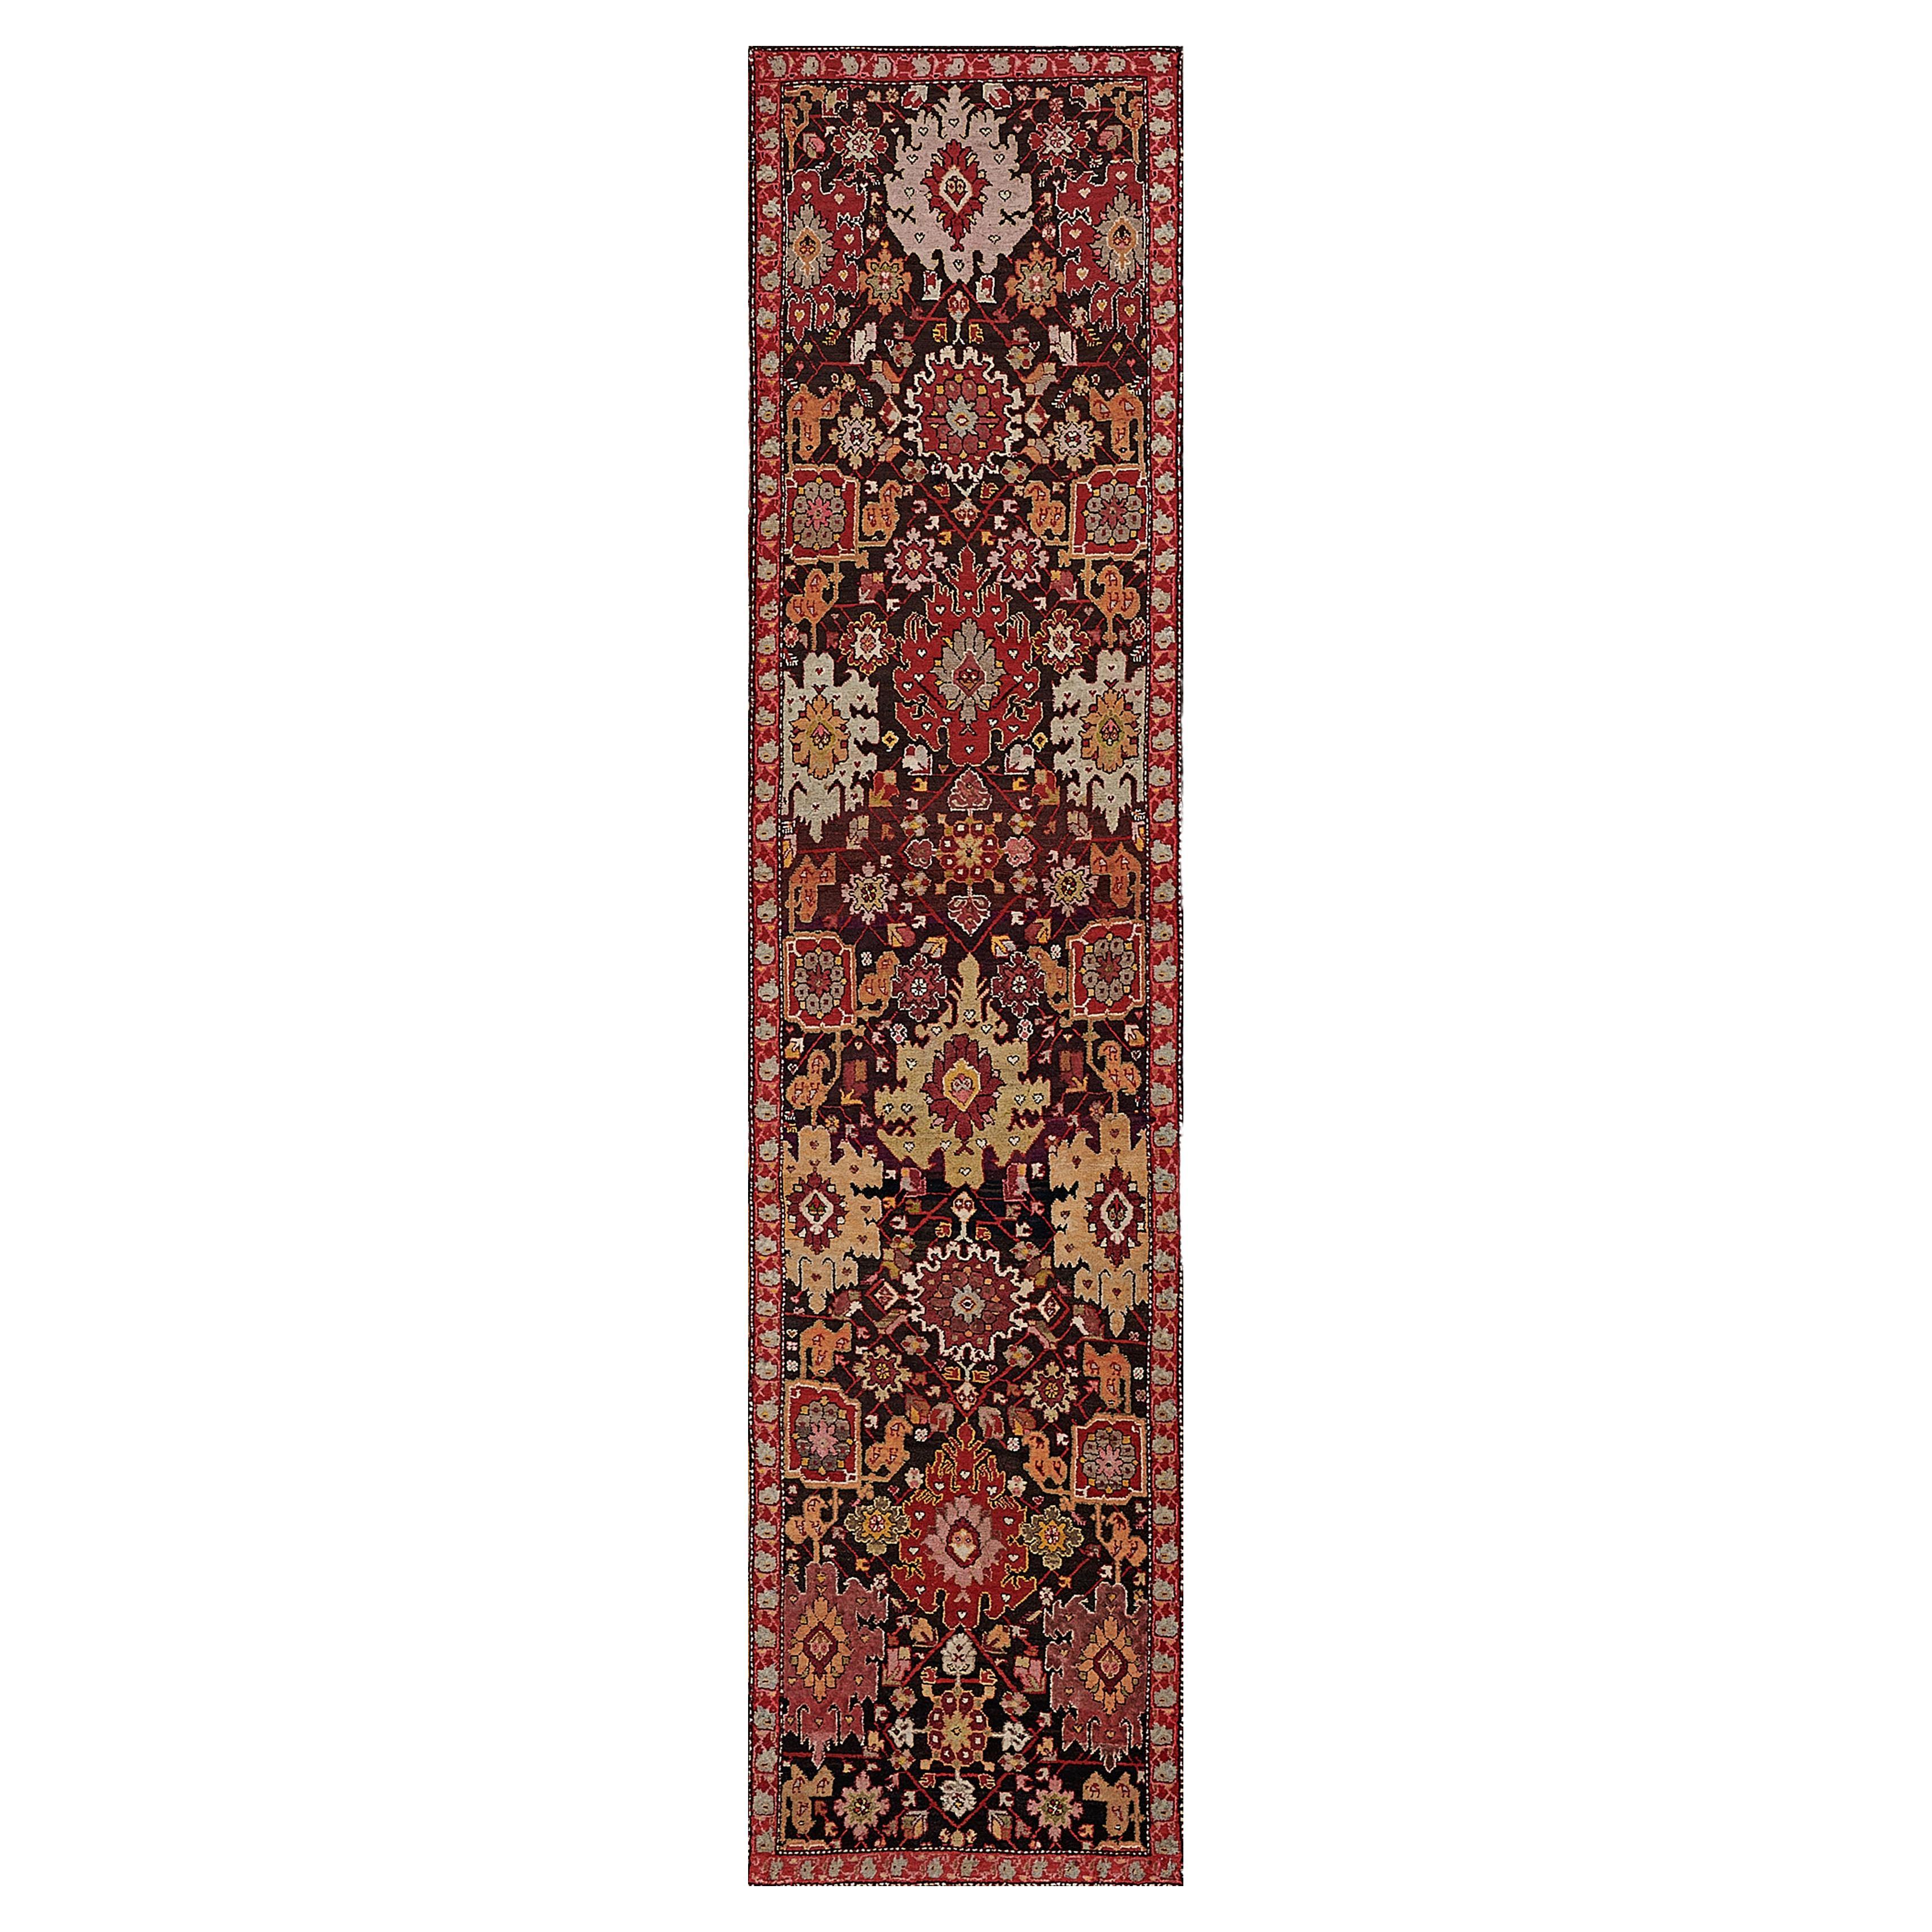 Hand-knotted Early 20th Century Floral Karabagh Runner